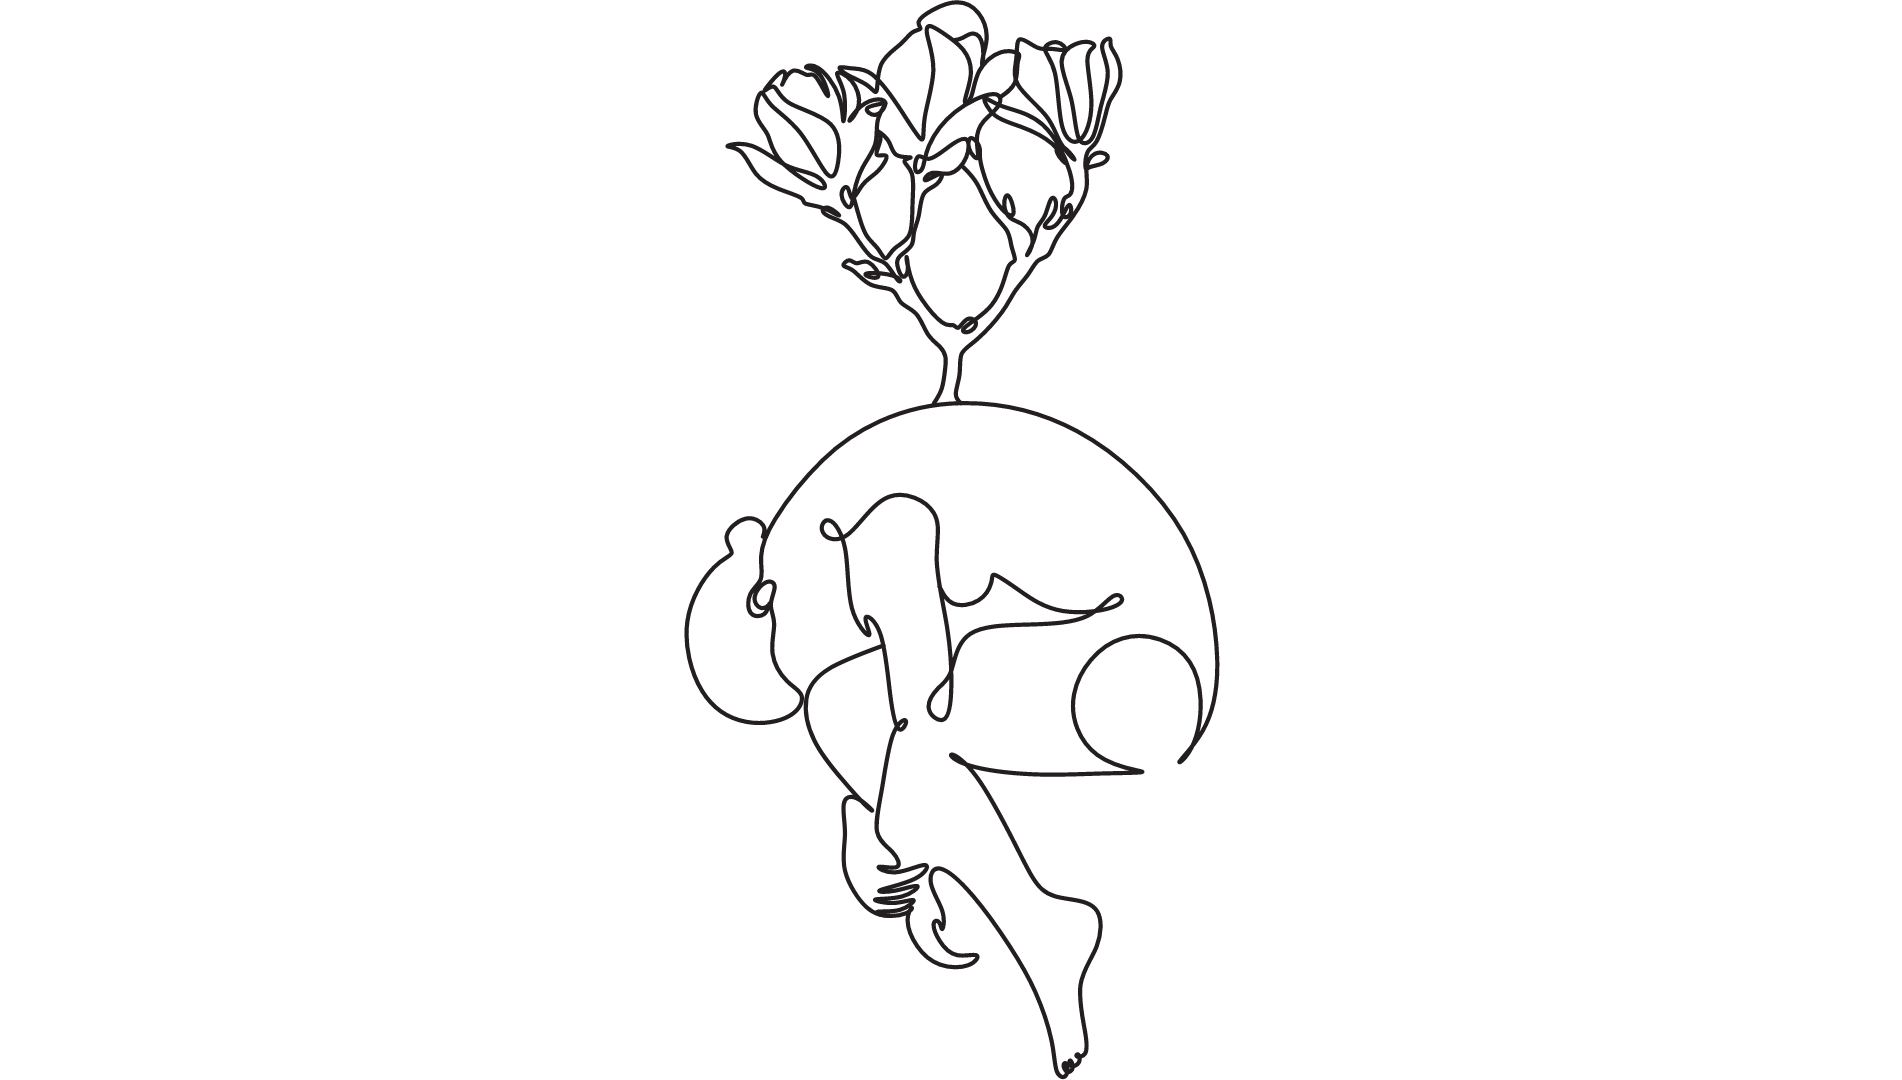 a single line outline of a person hunched over with flowers growing out of their back